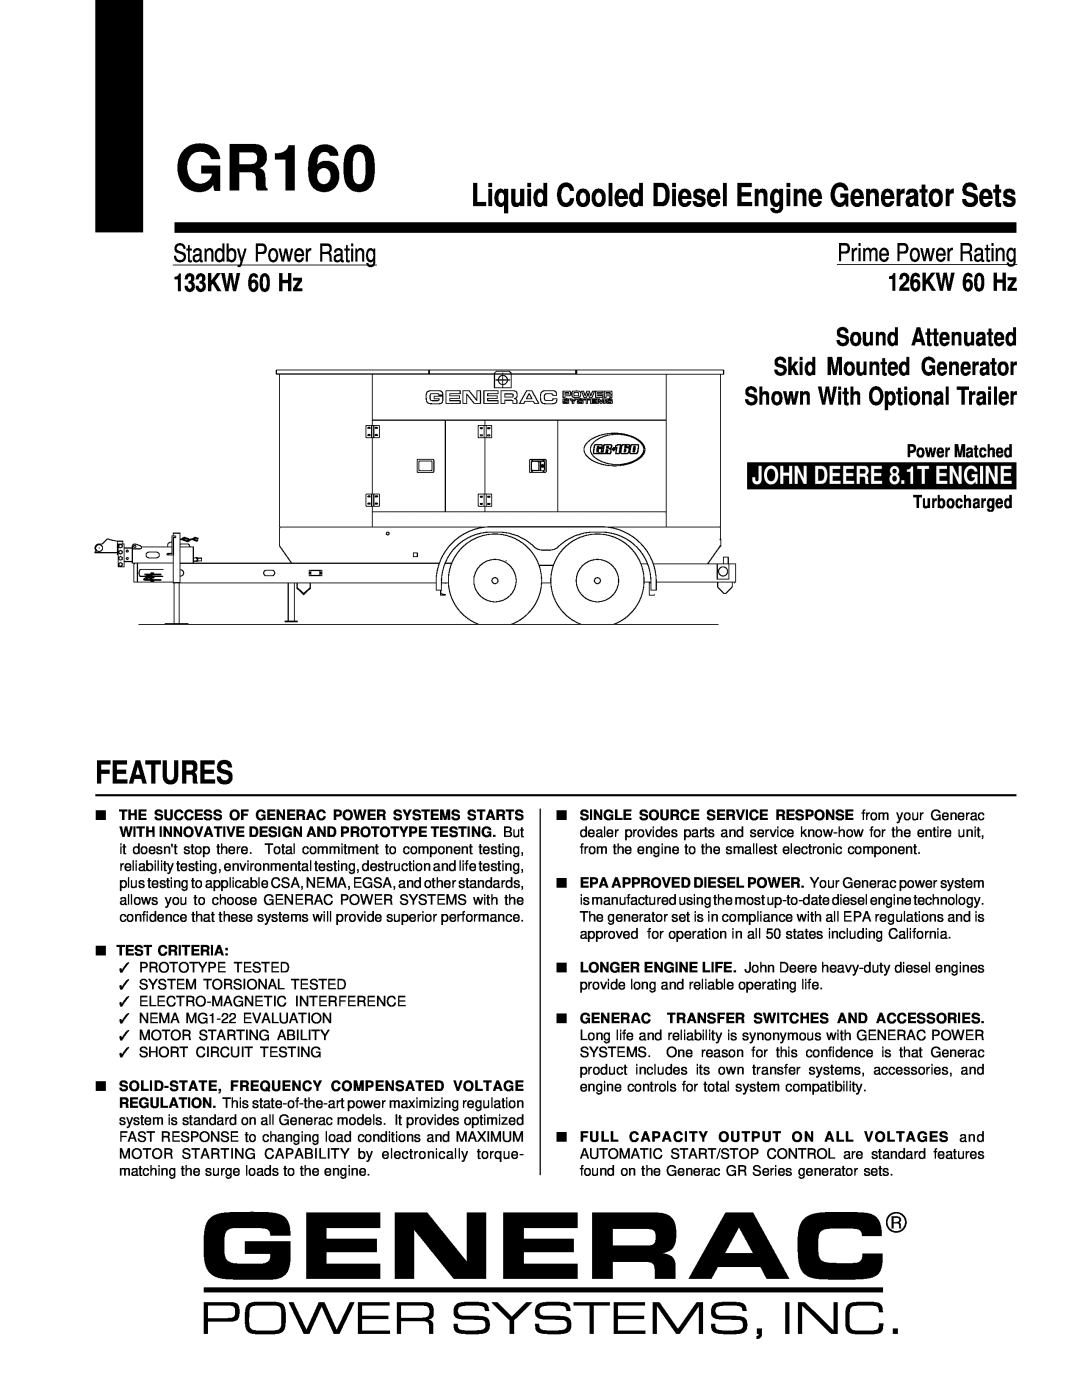 Generac GR160 manual Features, Liquid Cooled Diesel Engine Generator Sets, Standby Power Rating, Prime Power Rating 